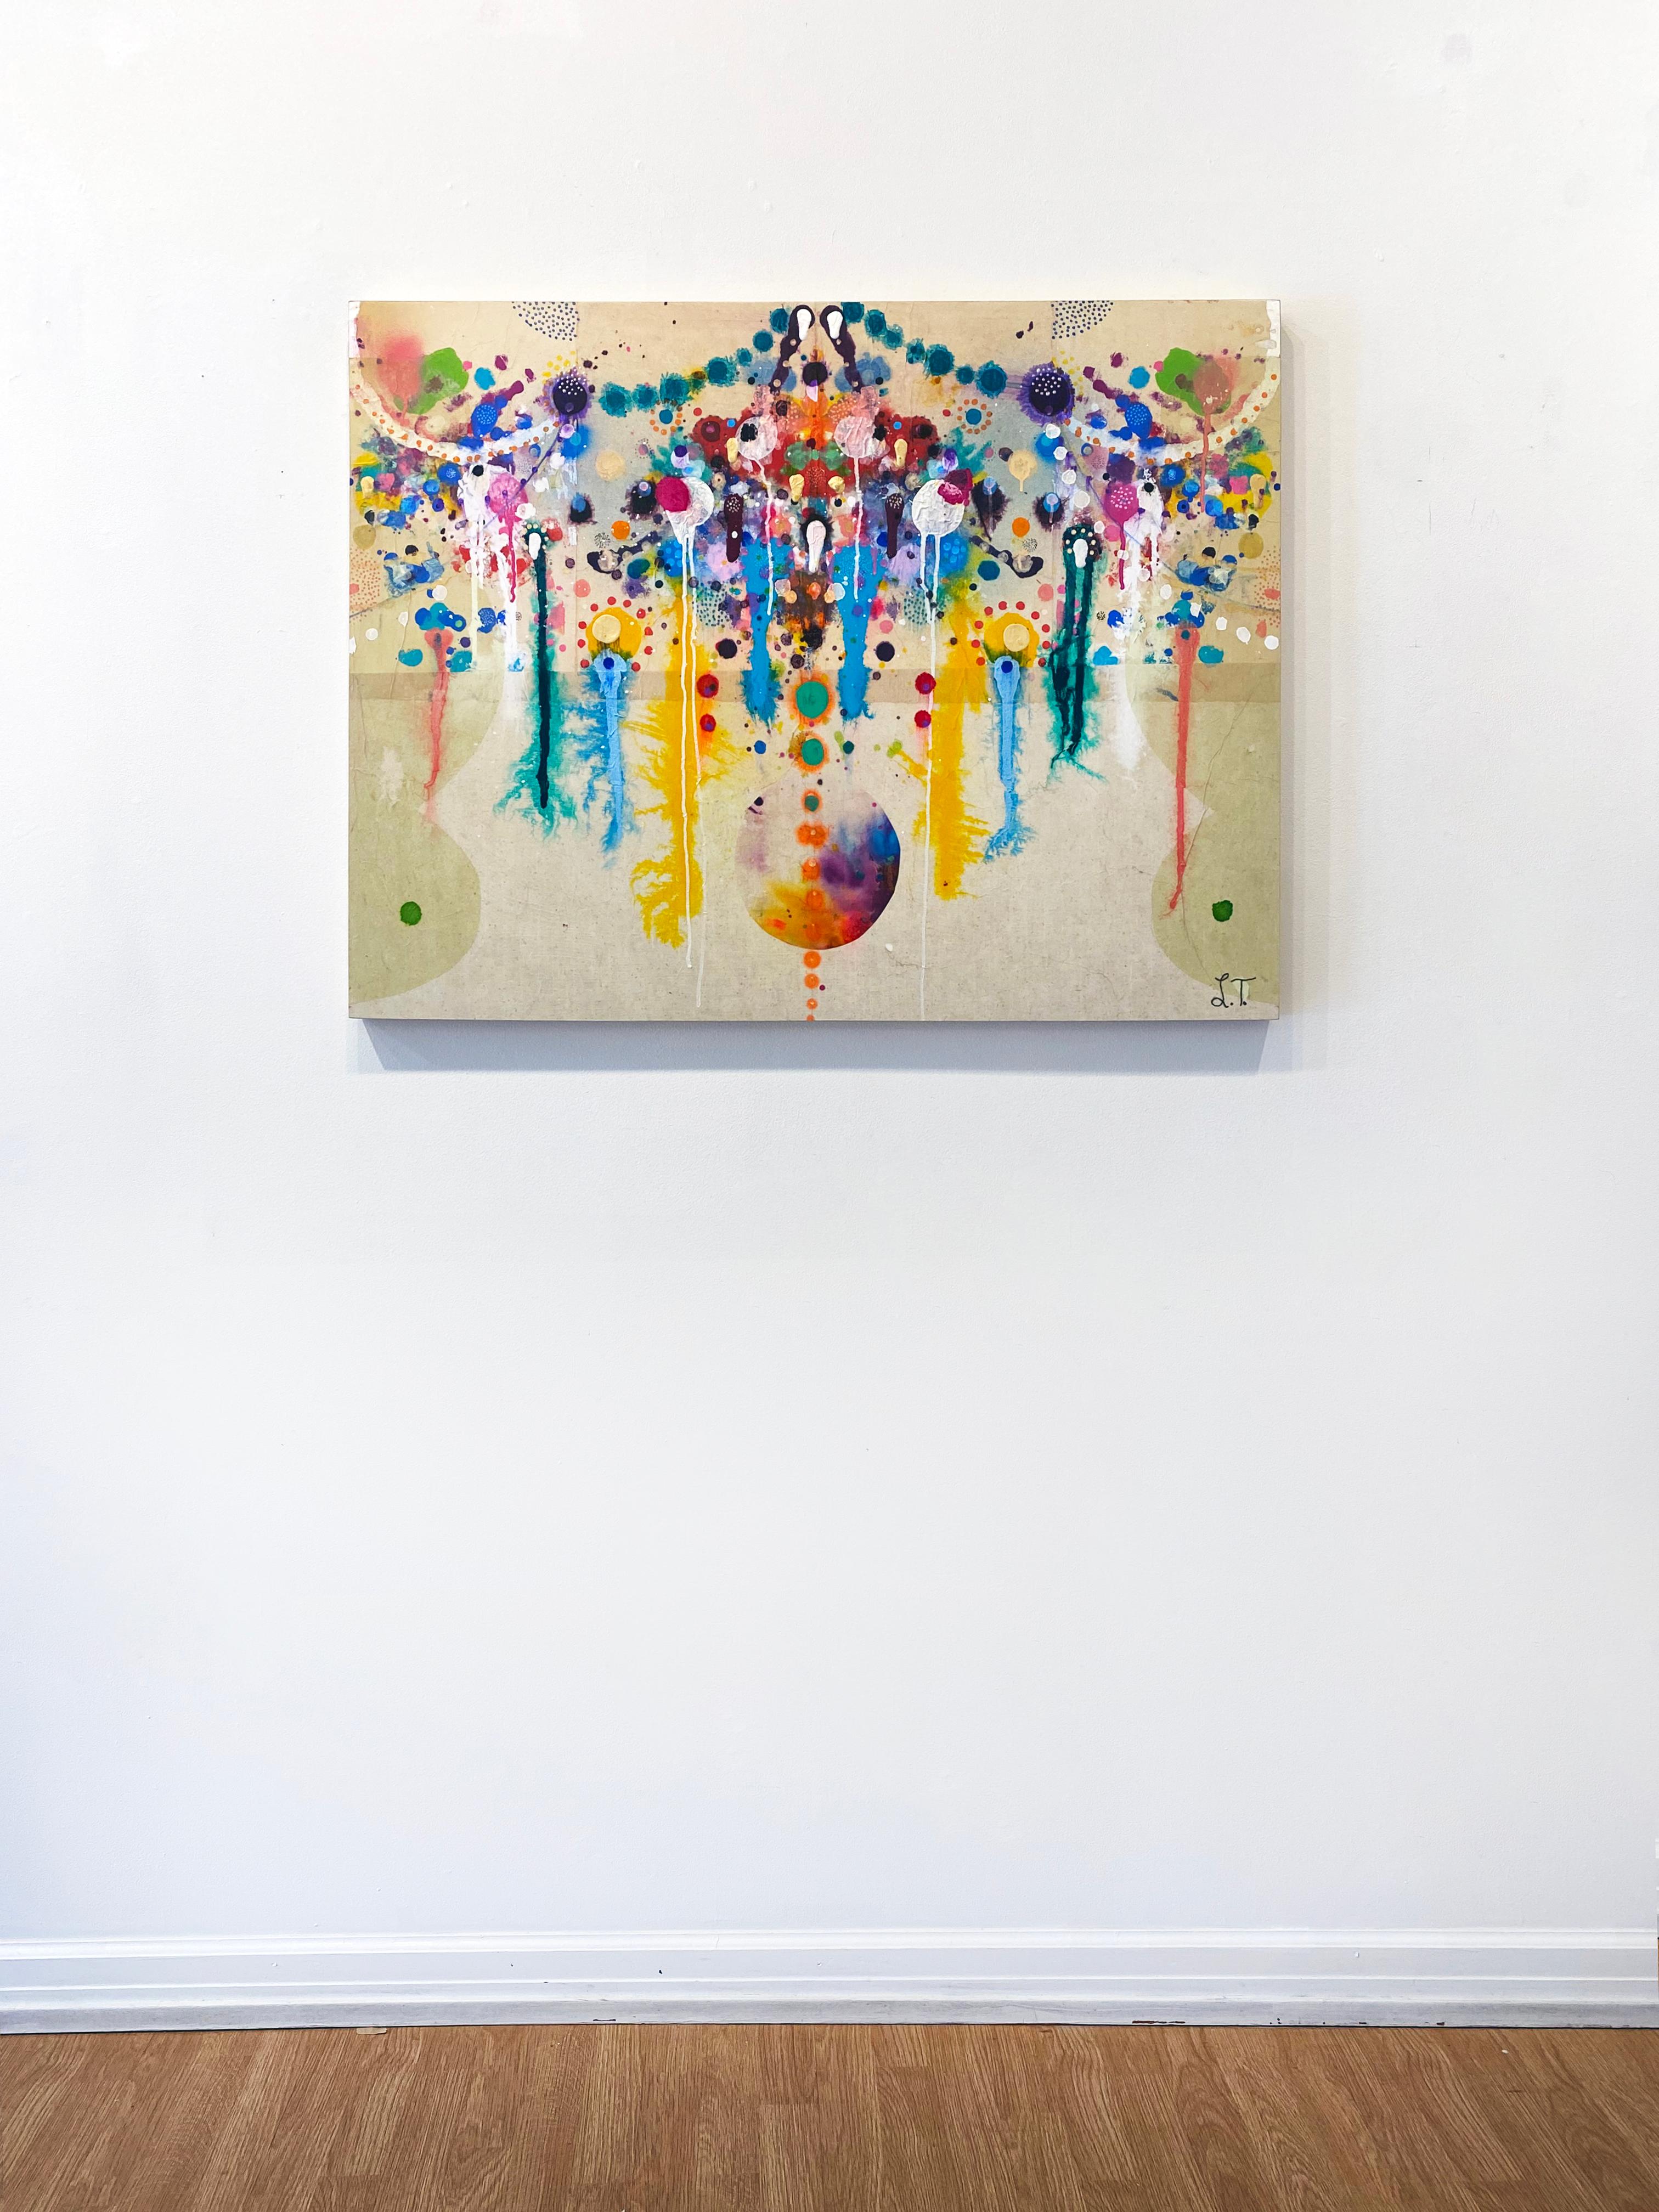 Abstract, Colorful Mixed Media Painting by Liz Tran, 'Mirror 45' For Sale 3